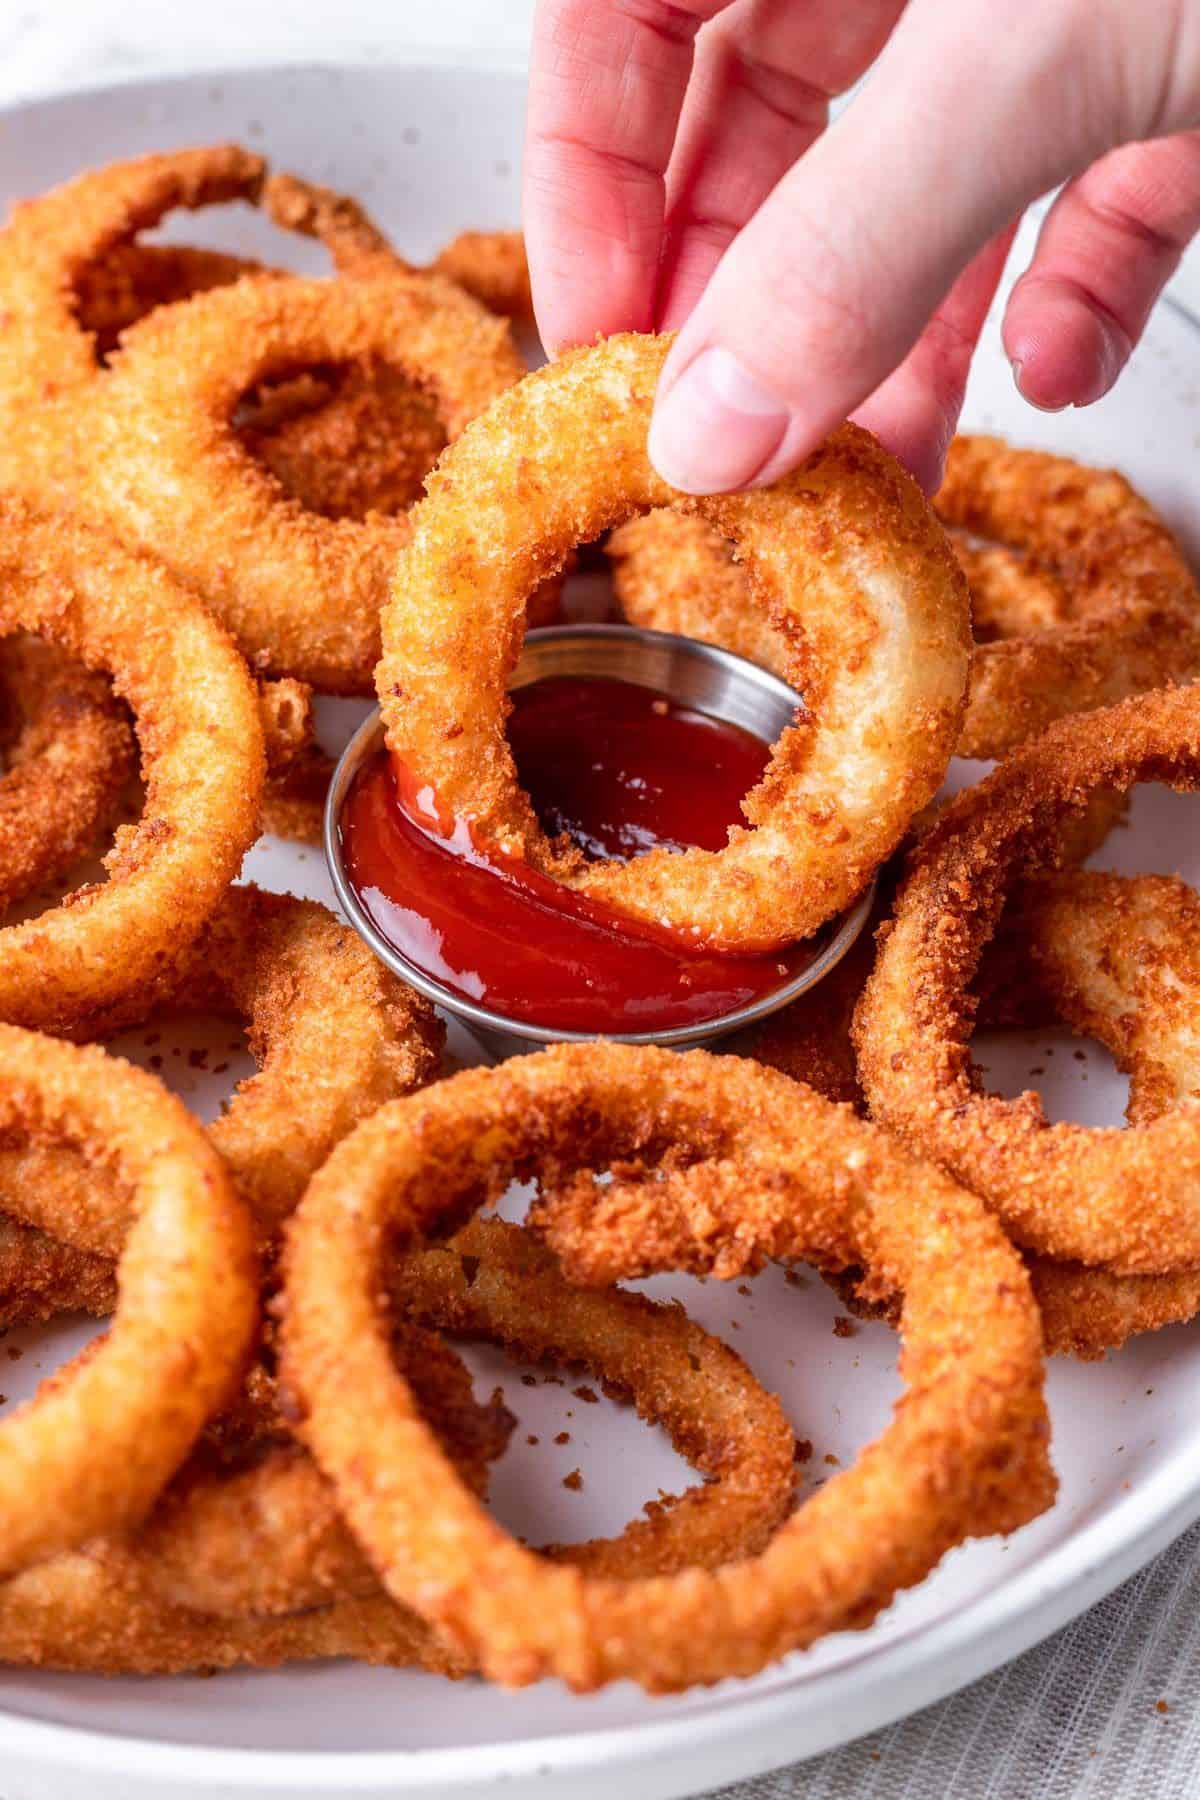 Dunking onion rings in ketchup.